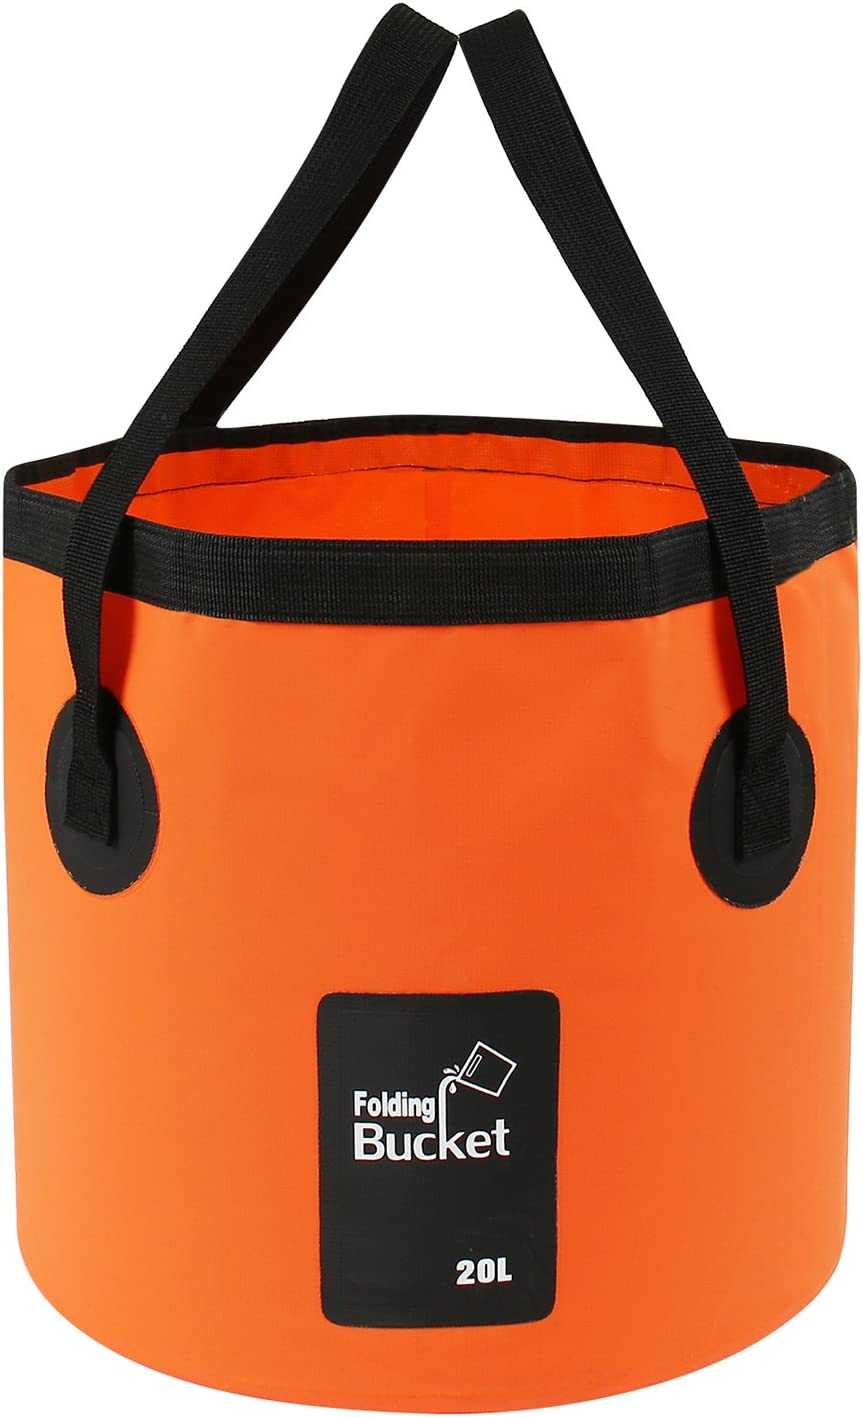 20L Litre Orange Bucket Fishing Camping Hiking Portable Folding Bucket Collapsible Water Storage Container Bag